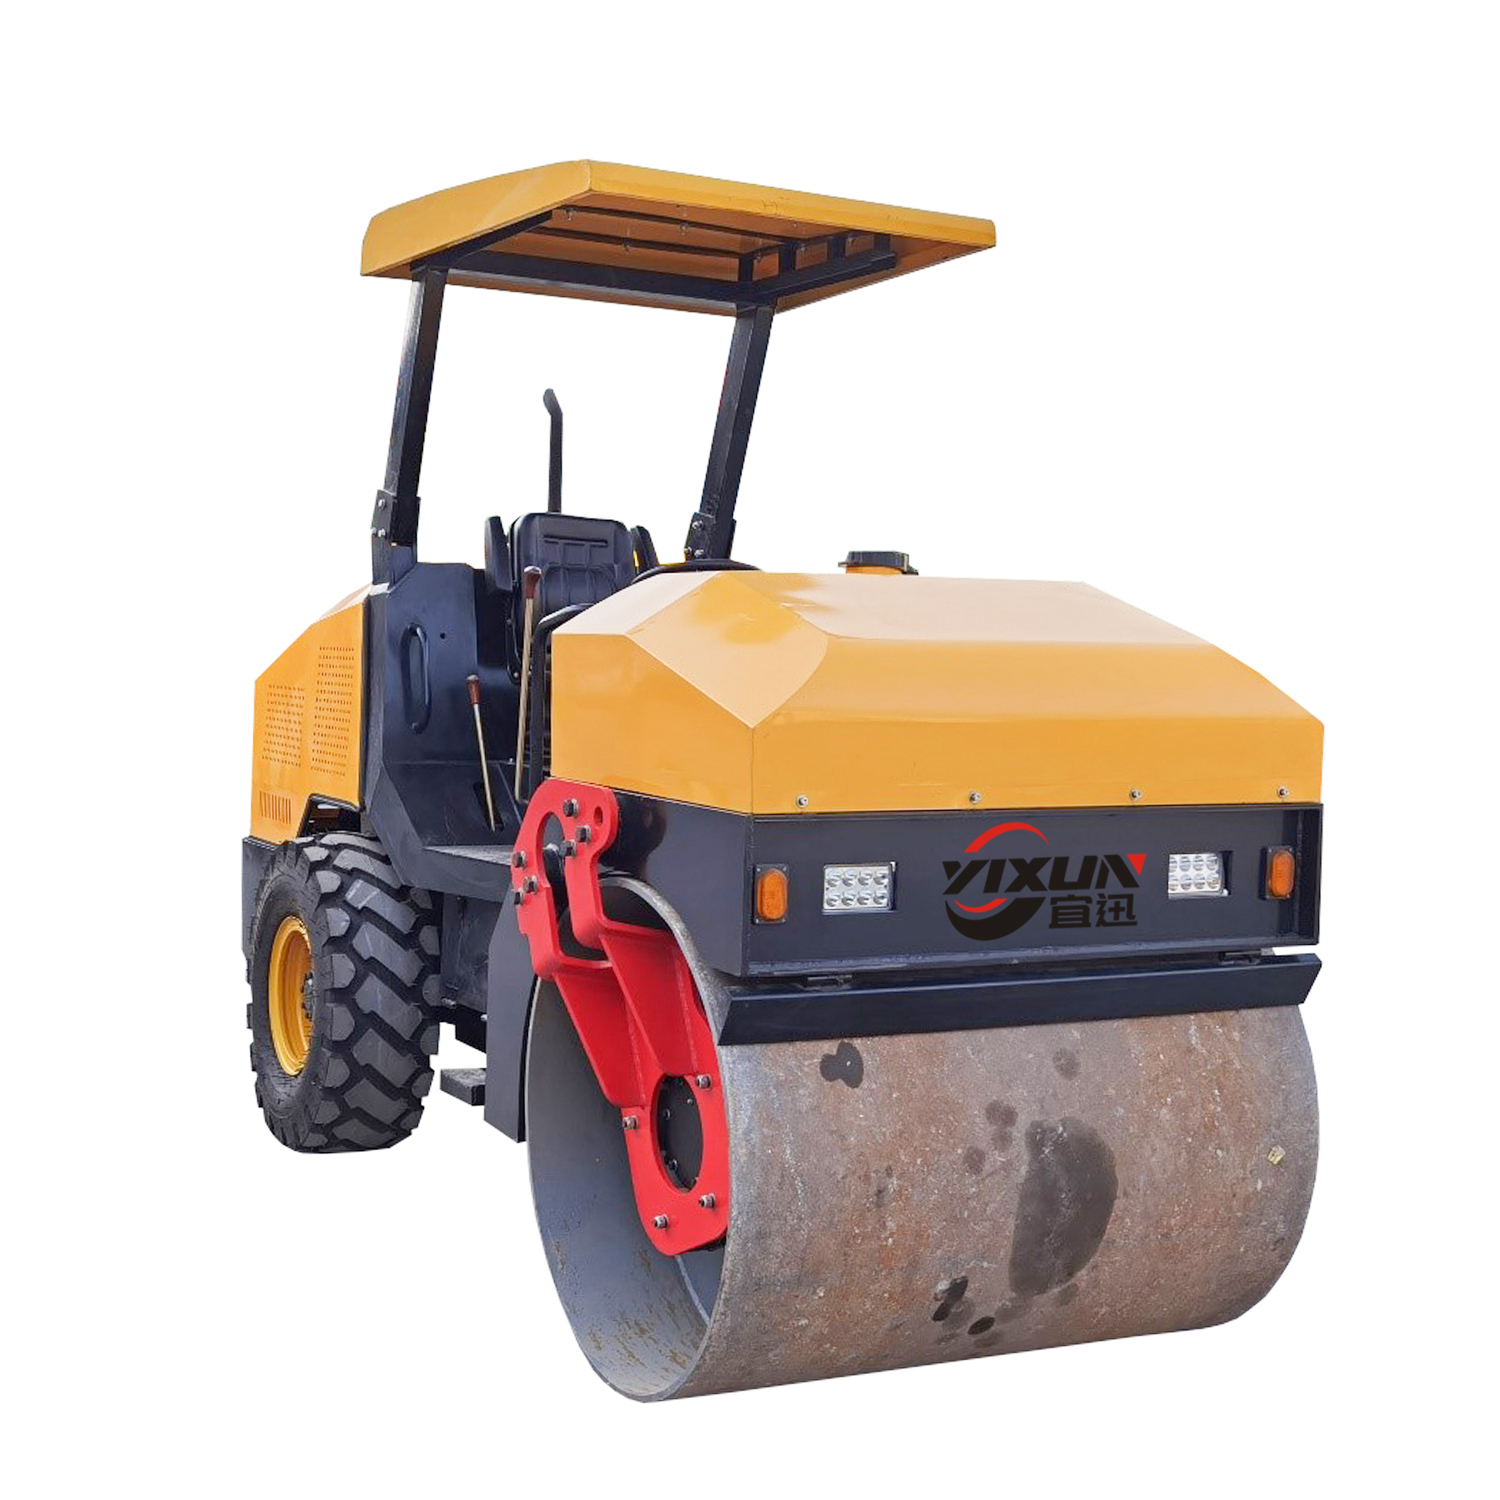 YIXUN High quality shandong road roller compactor 4 ton single drum soil road roller for price